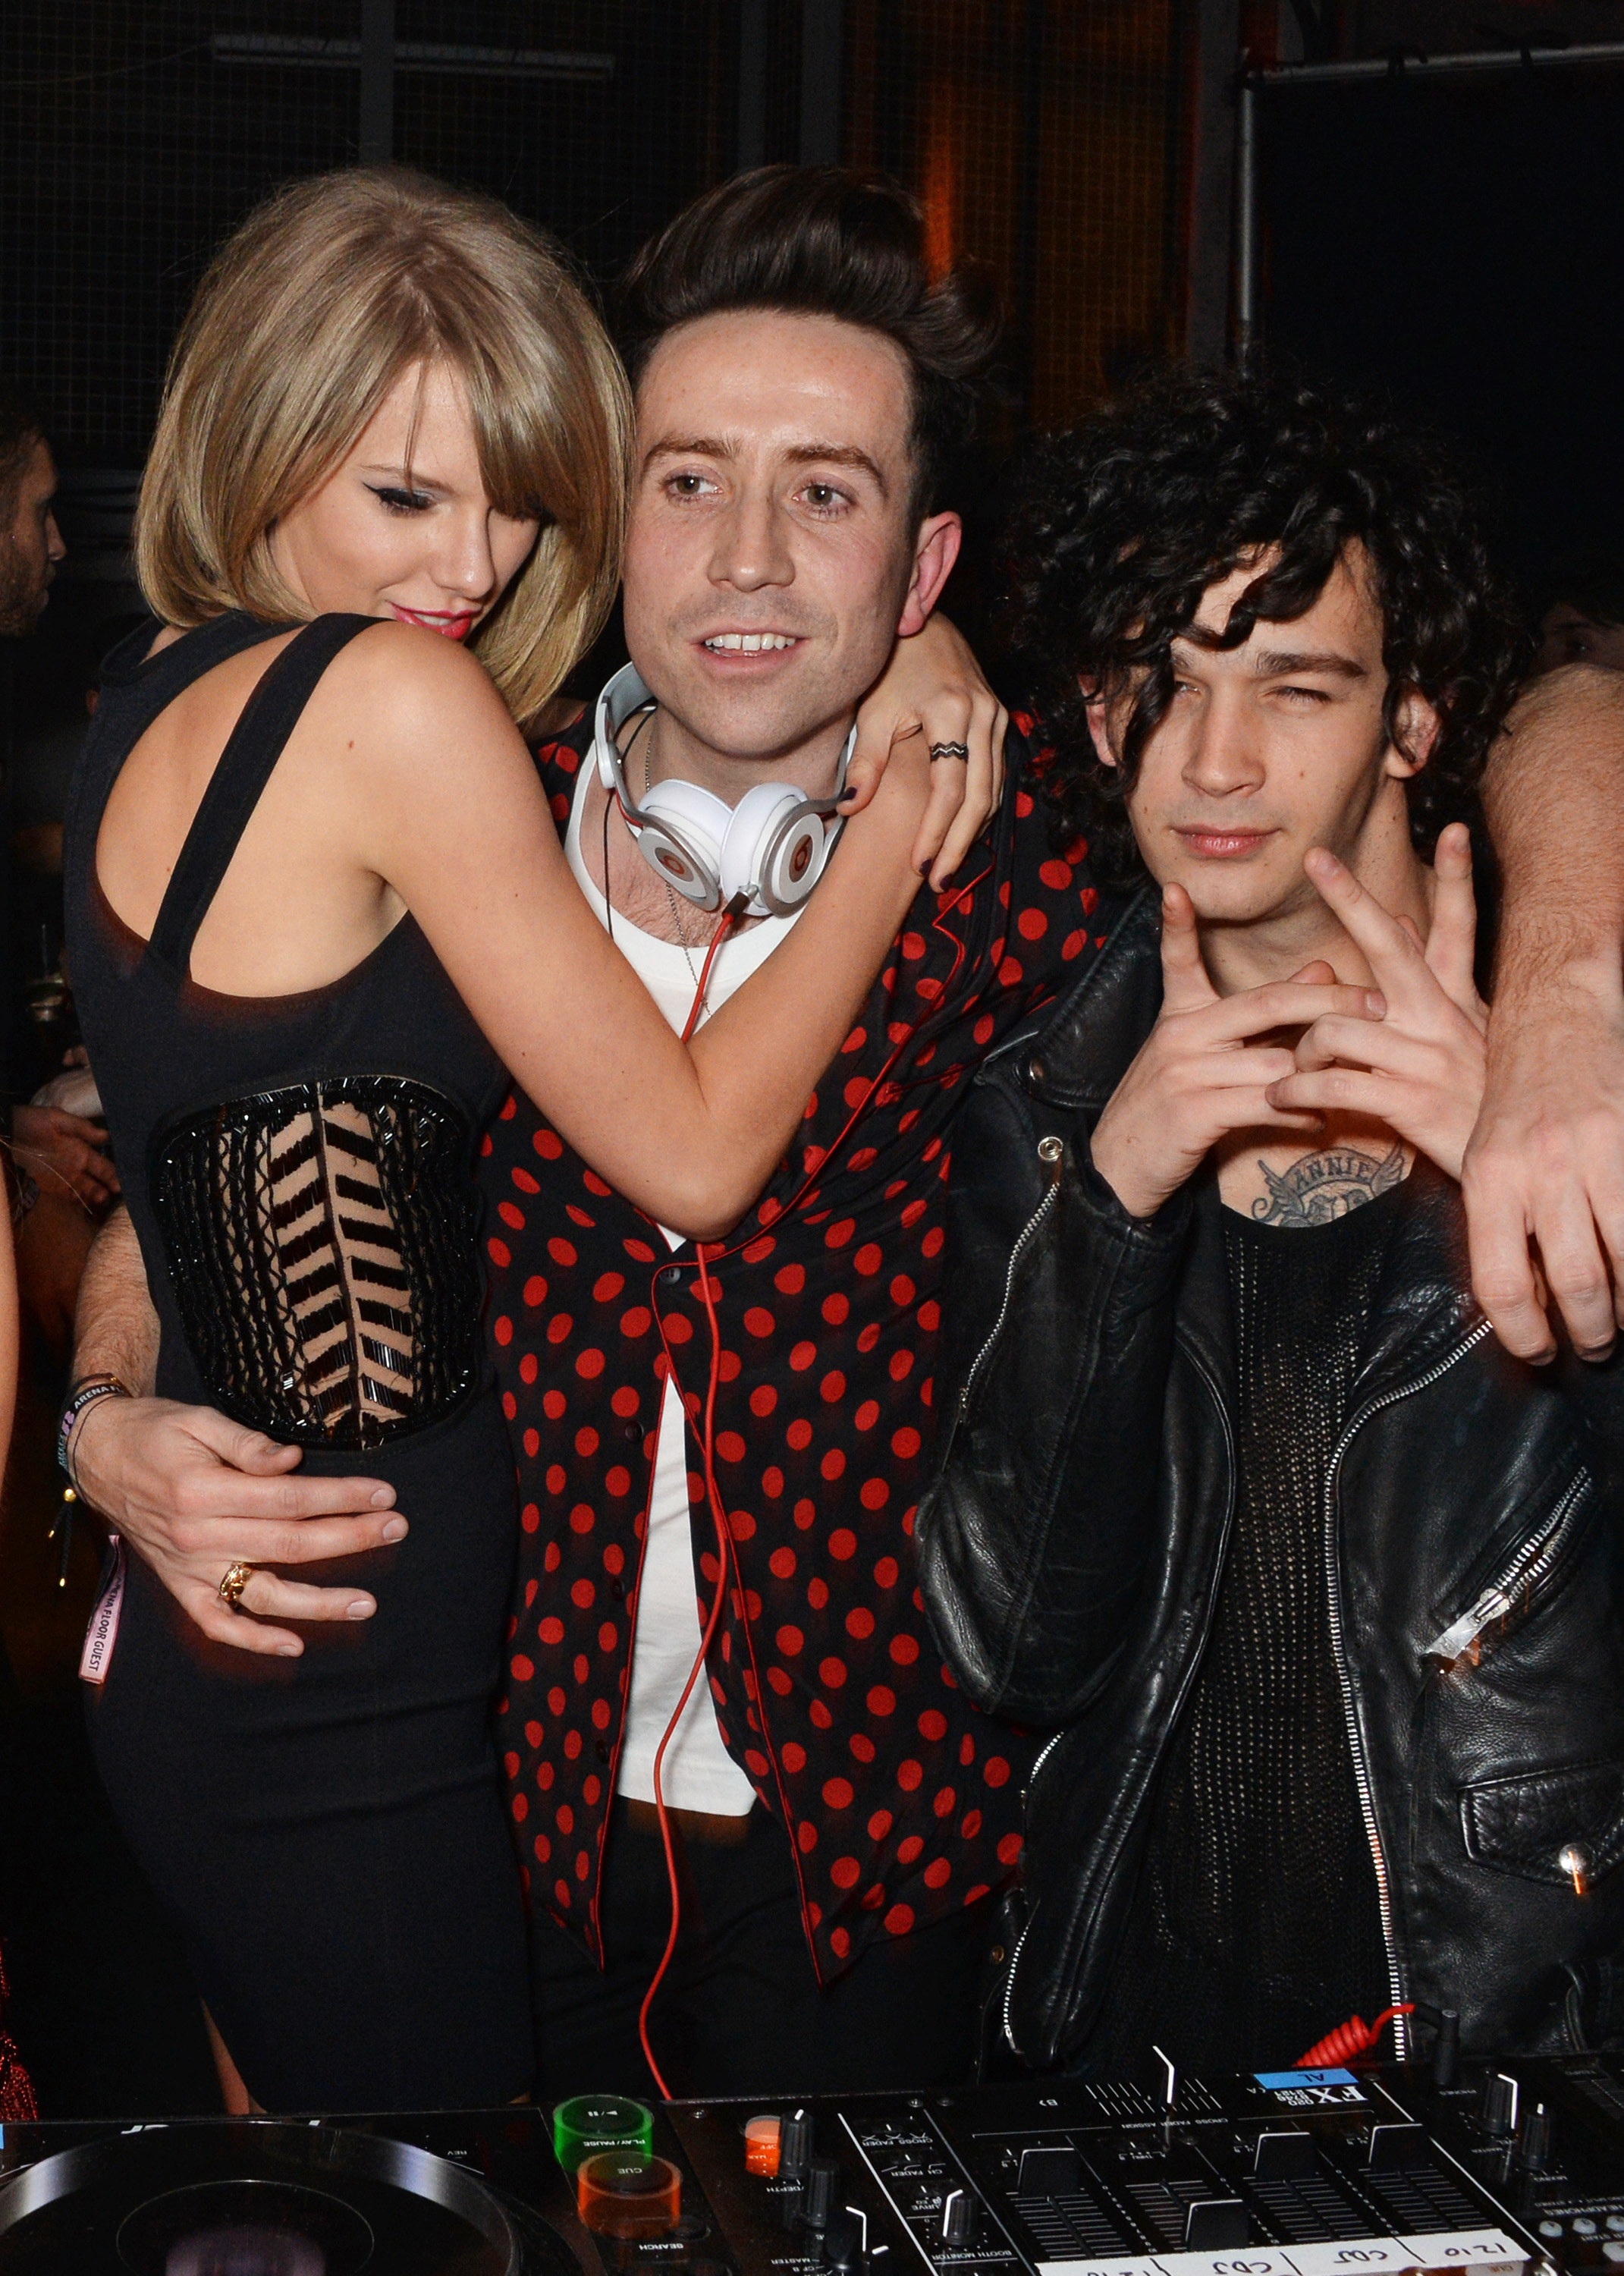 taylor hugging a dj while matty stands next to them